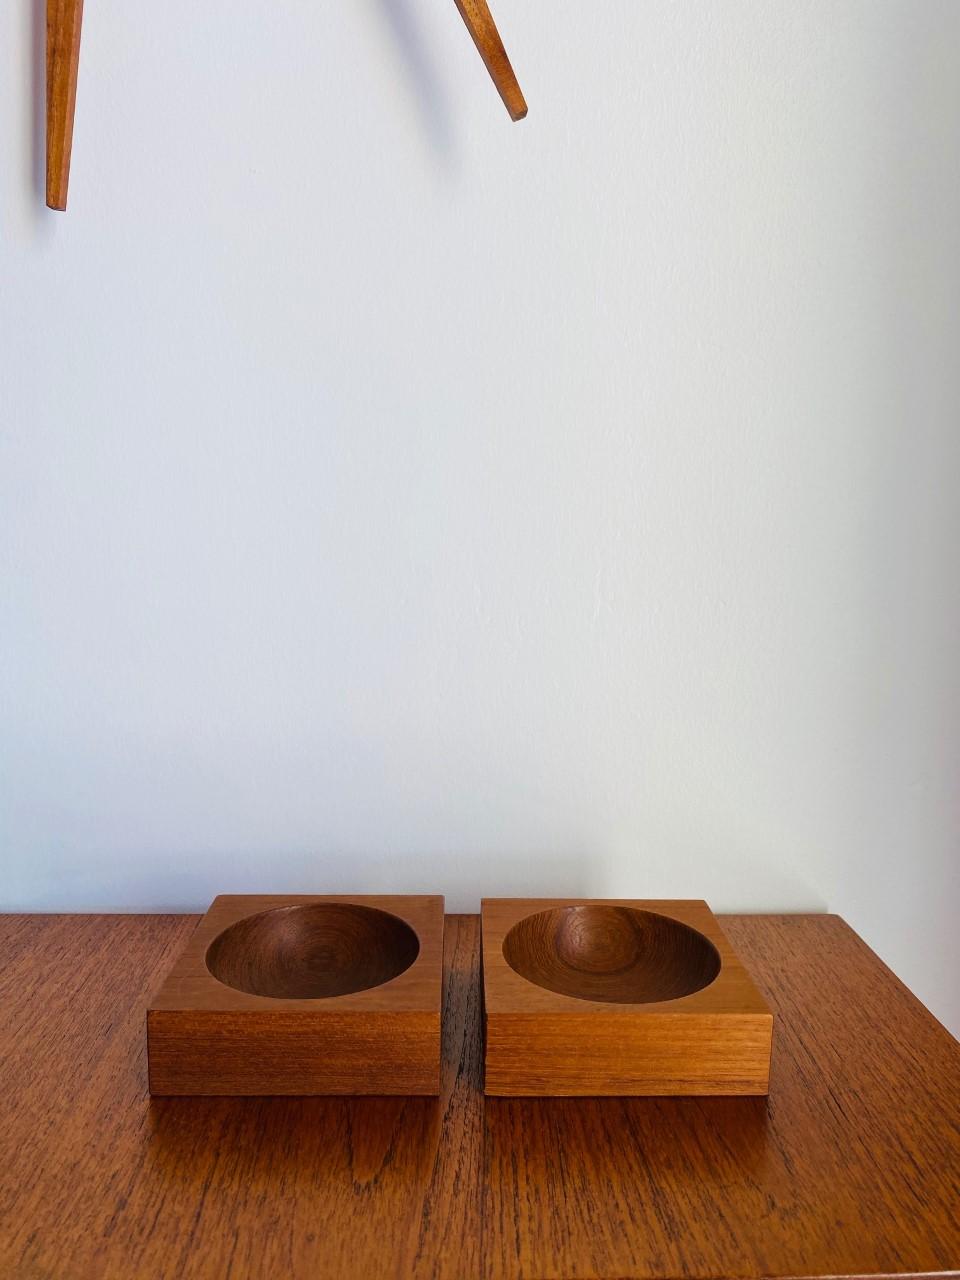 Beautiful pair of vintage teak wood bowls. These small wood vessels are minimalist in design. Of Japanese origin, the wood grain and design is linear and honest. Each square is immaculate in shape as a rounded indentation reveals itself in the